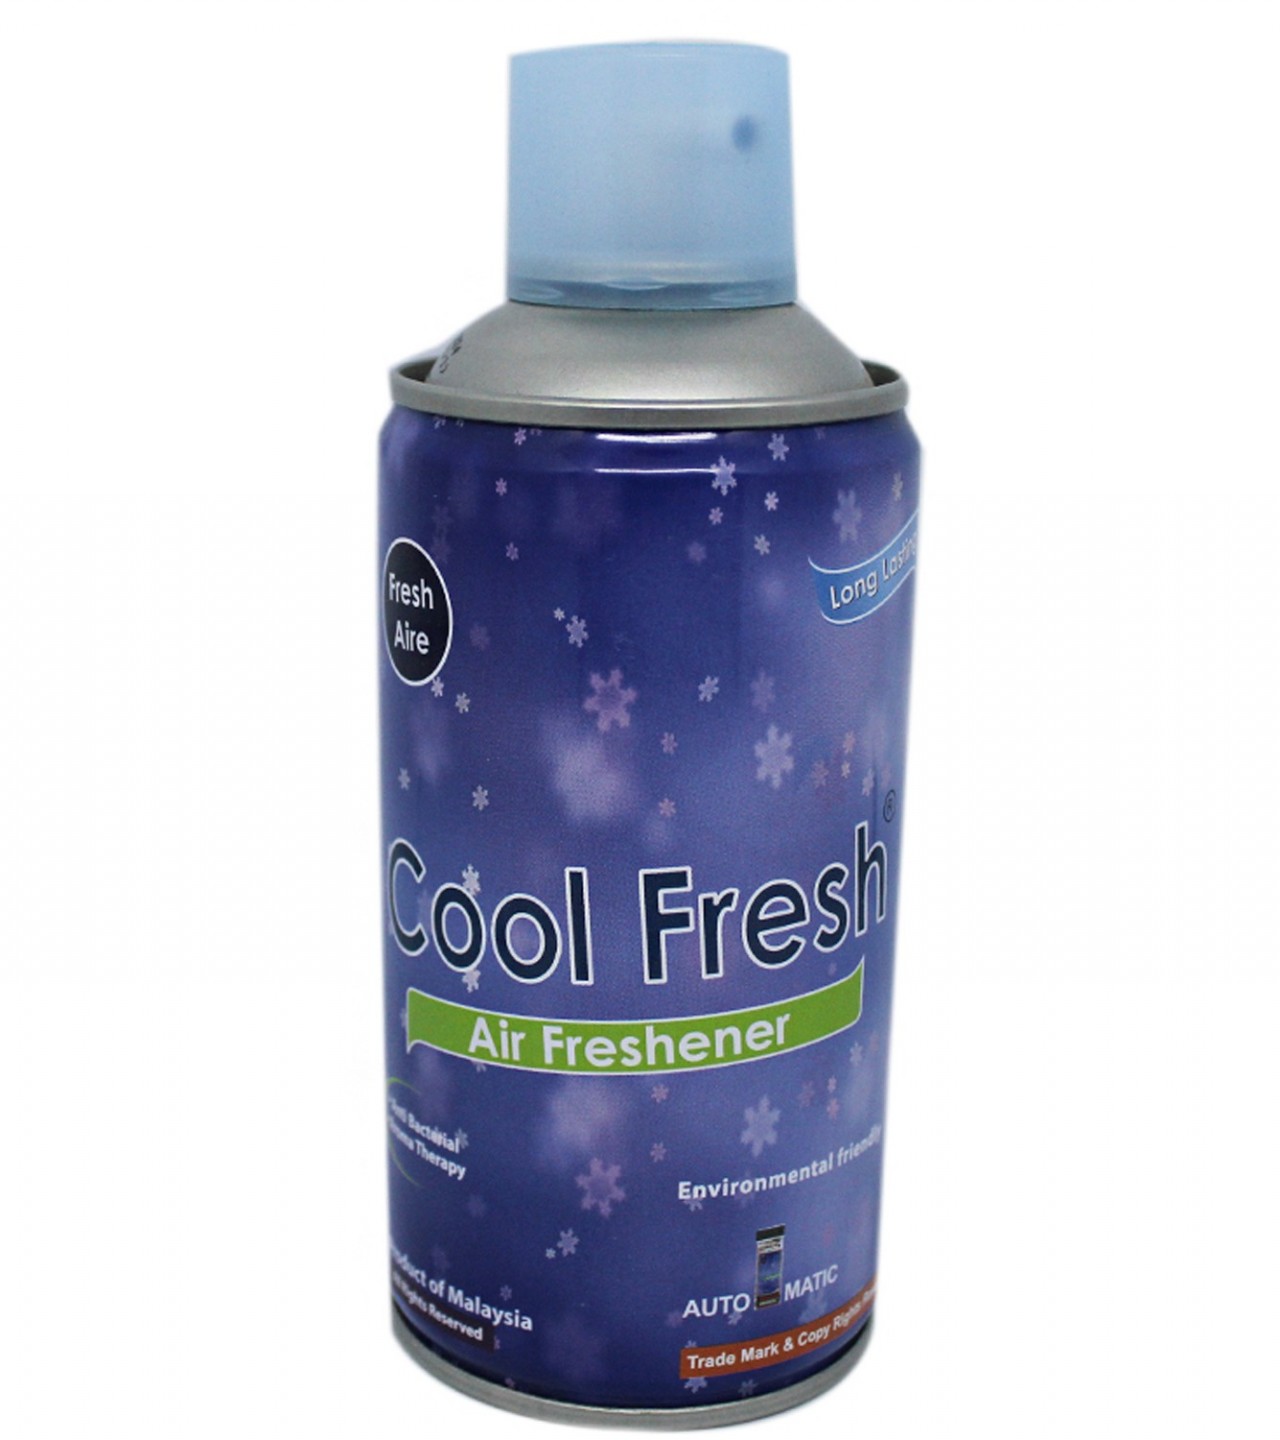 Automatic LCD Display Air Freshener Dispenser with Free Air Fresh Bottle Refill – 300 ml